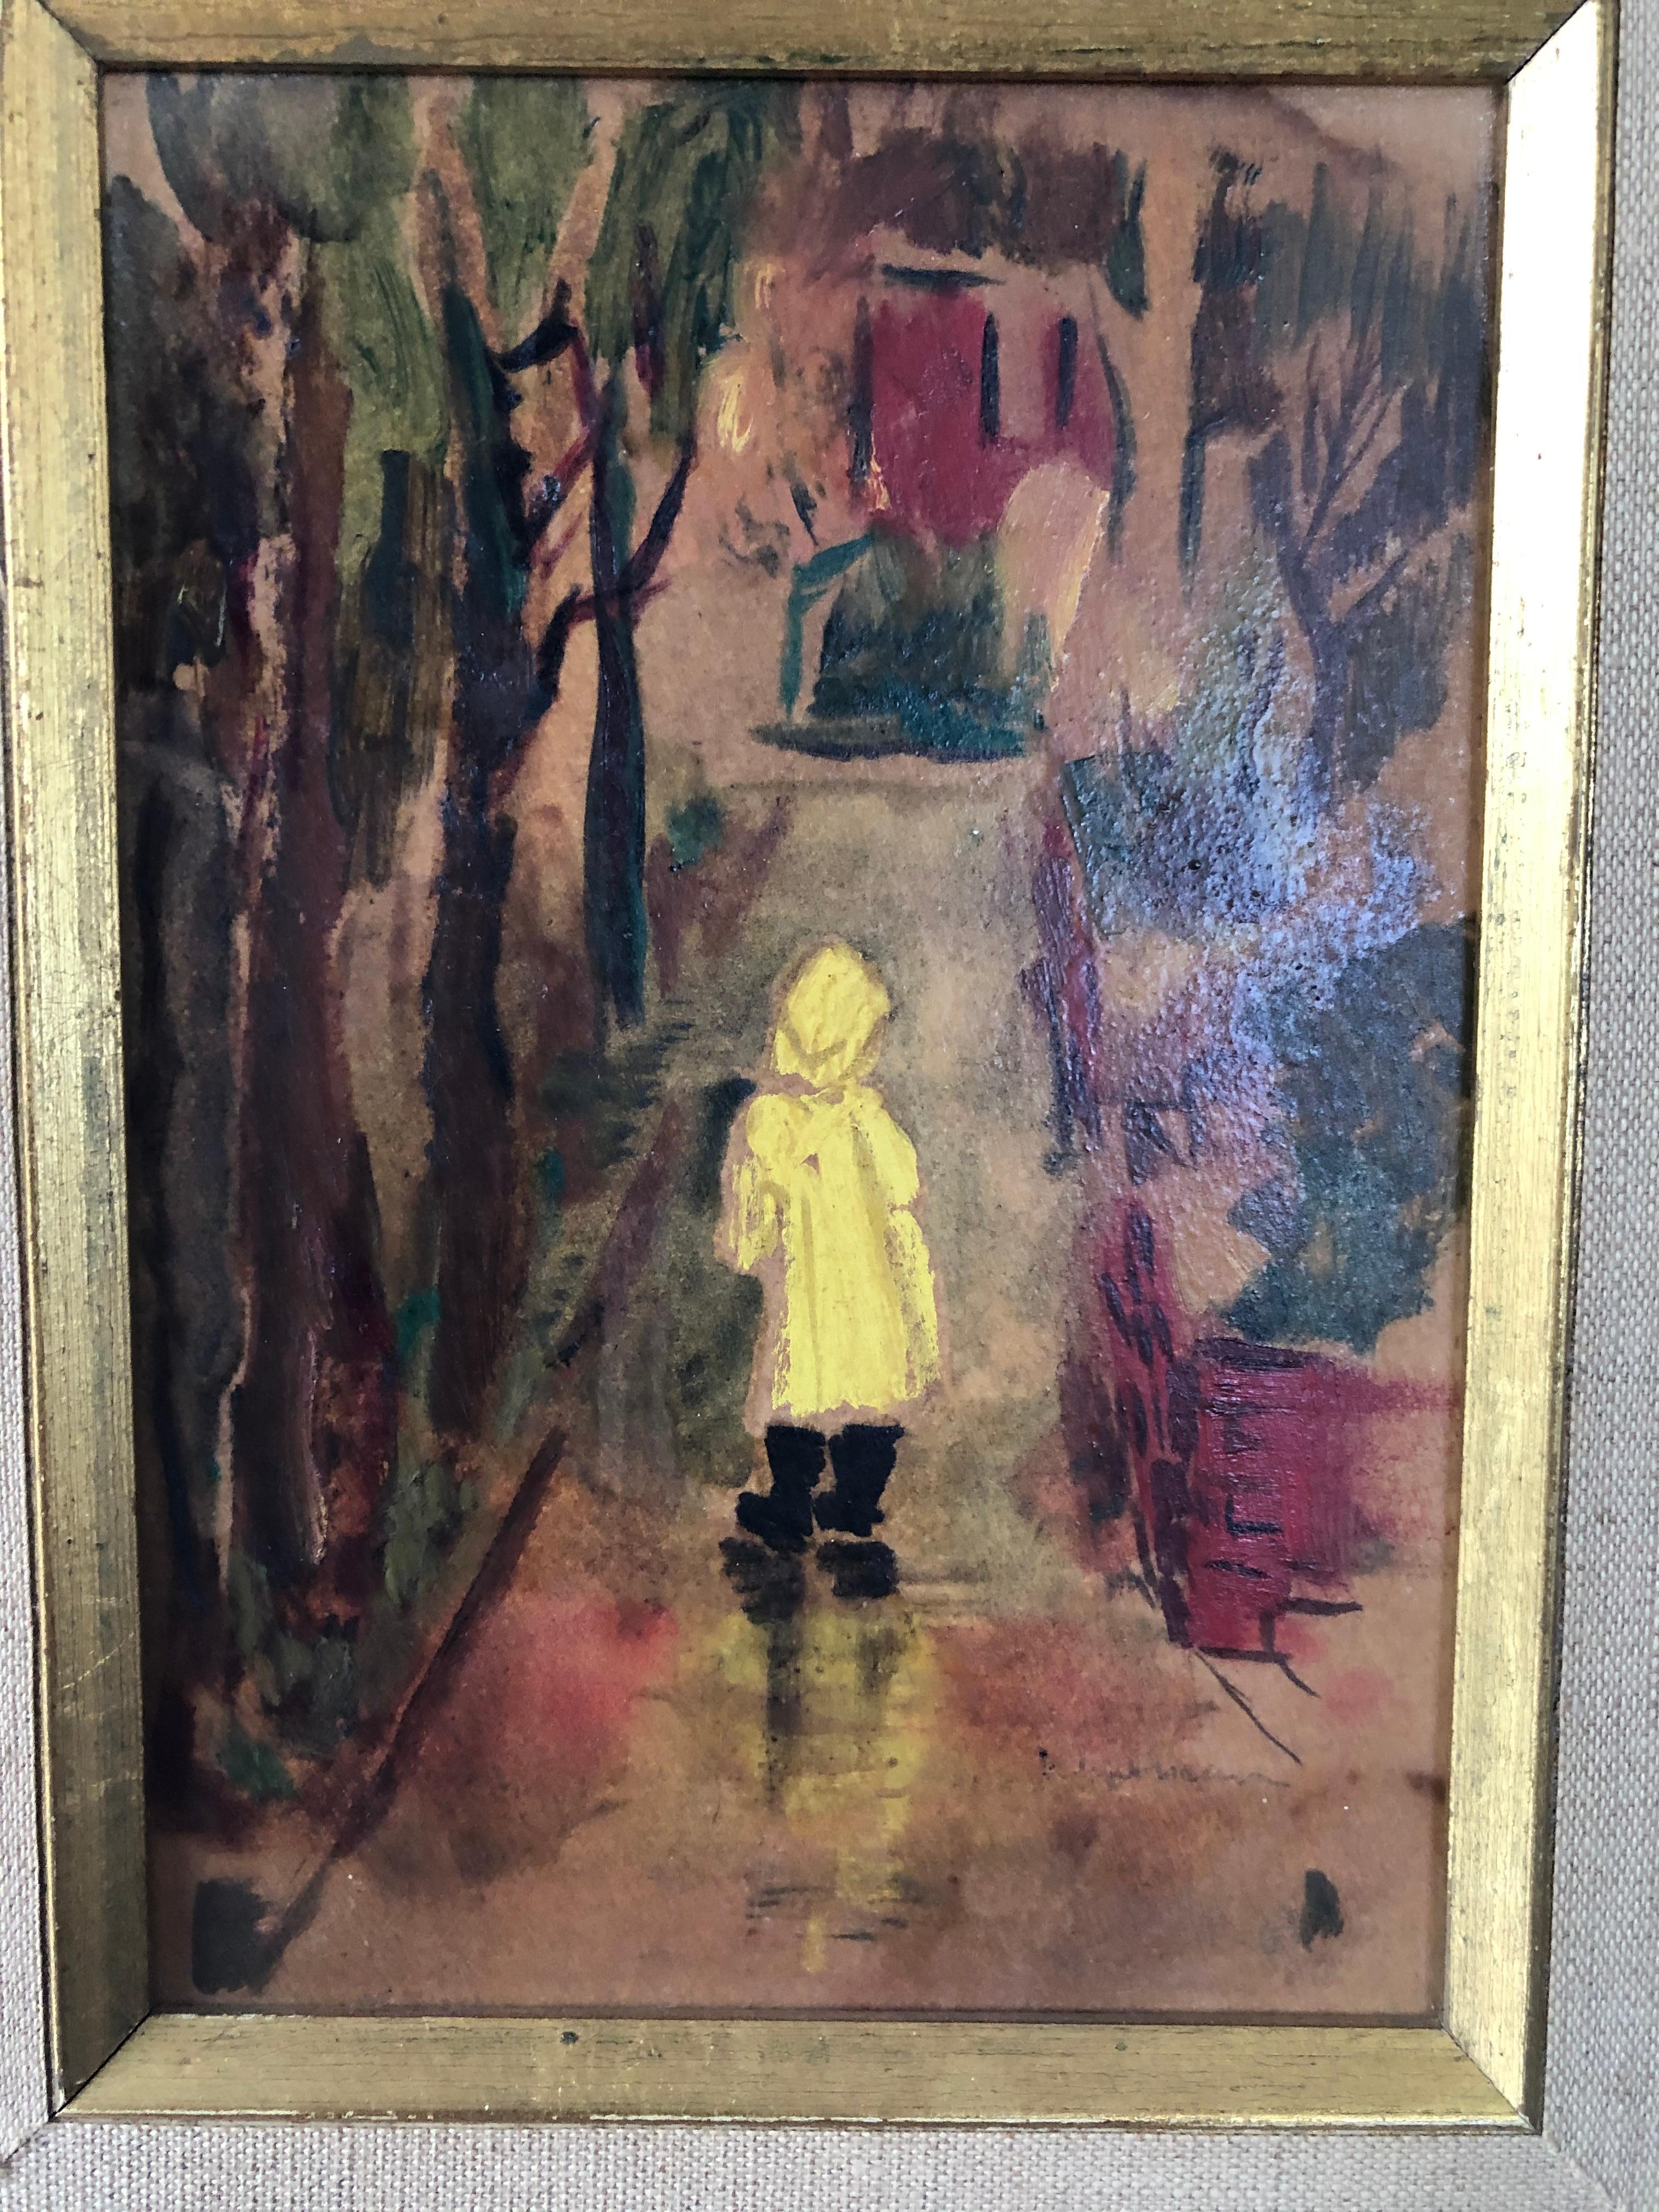 Unknown Landscape Painting - Mystery Mid 20th Century Expressionist Oil on Board "Walking in The Rain"